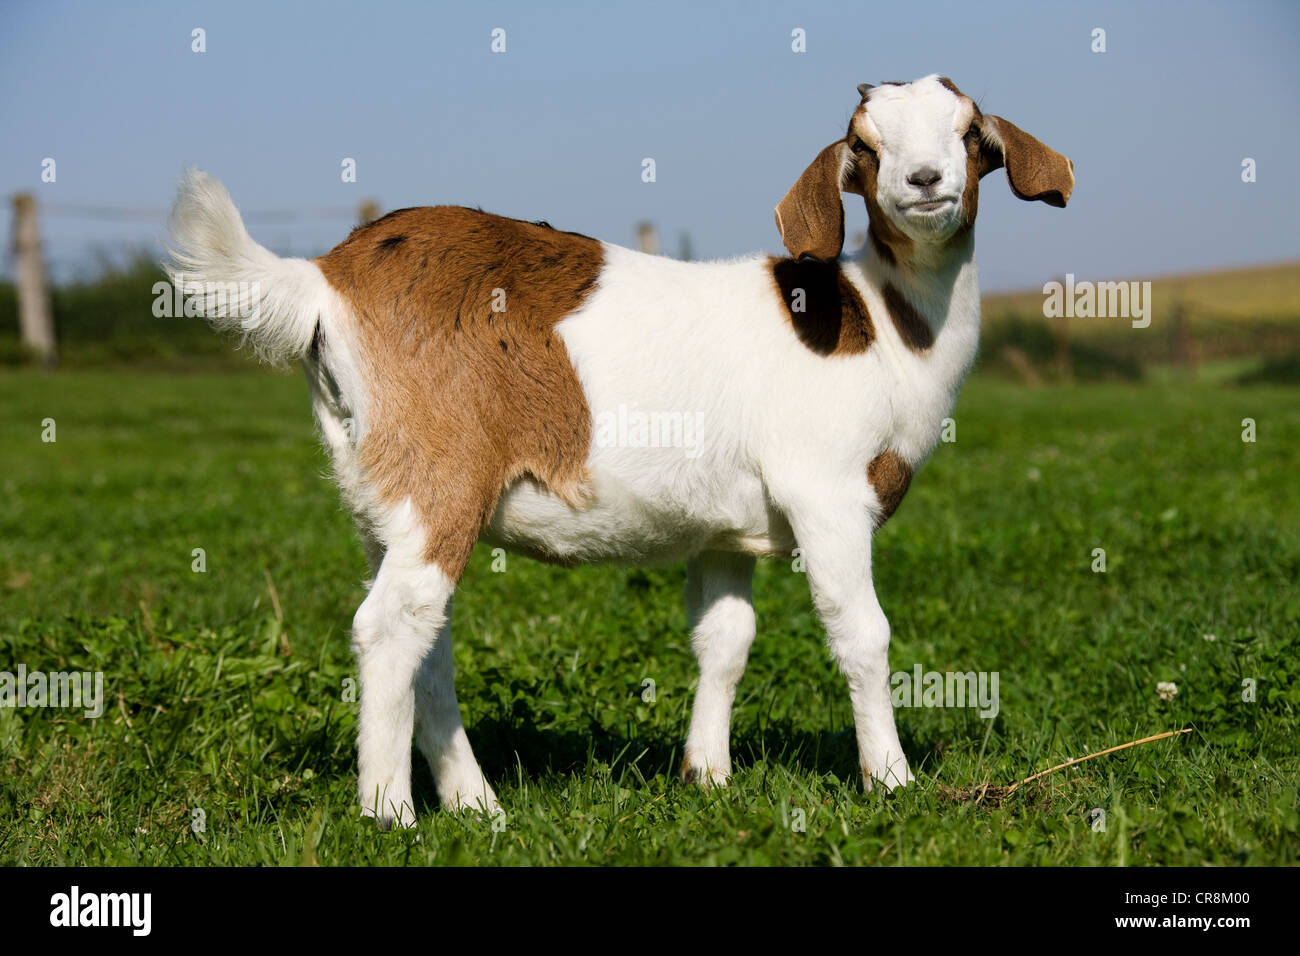 Kid Goat in field Banque D'Images